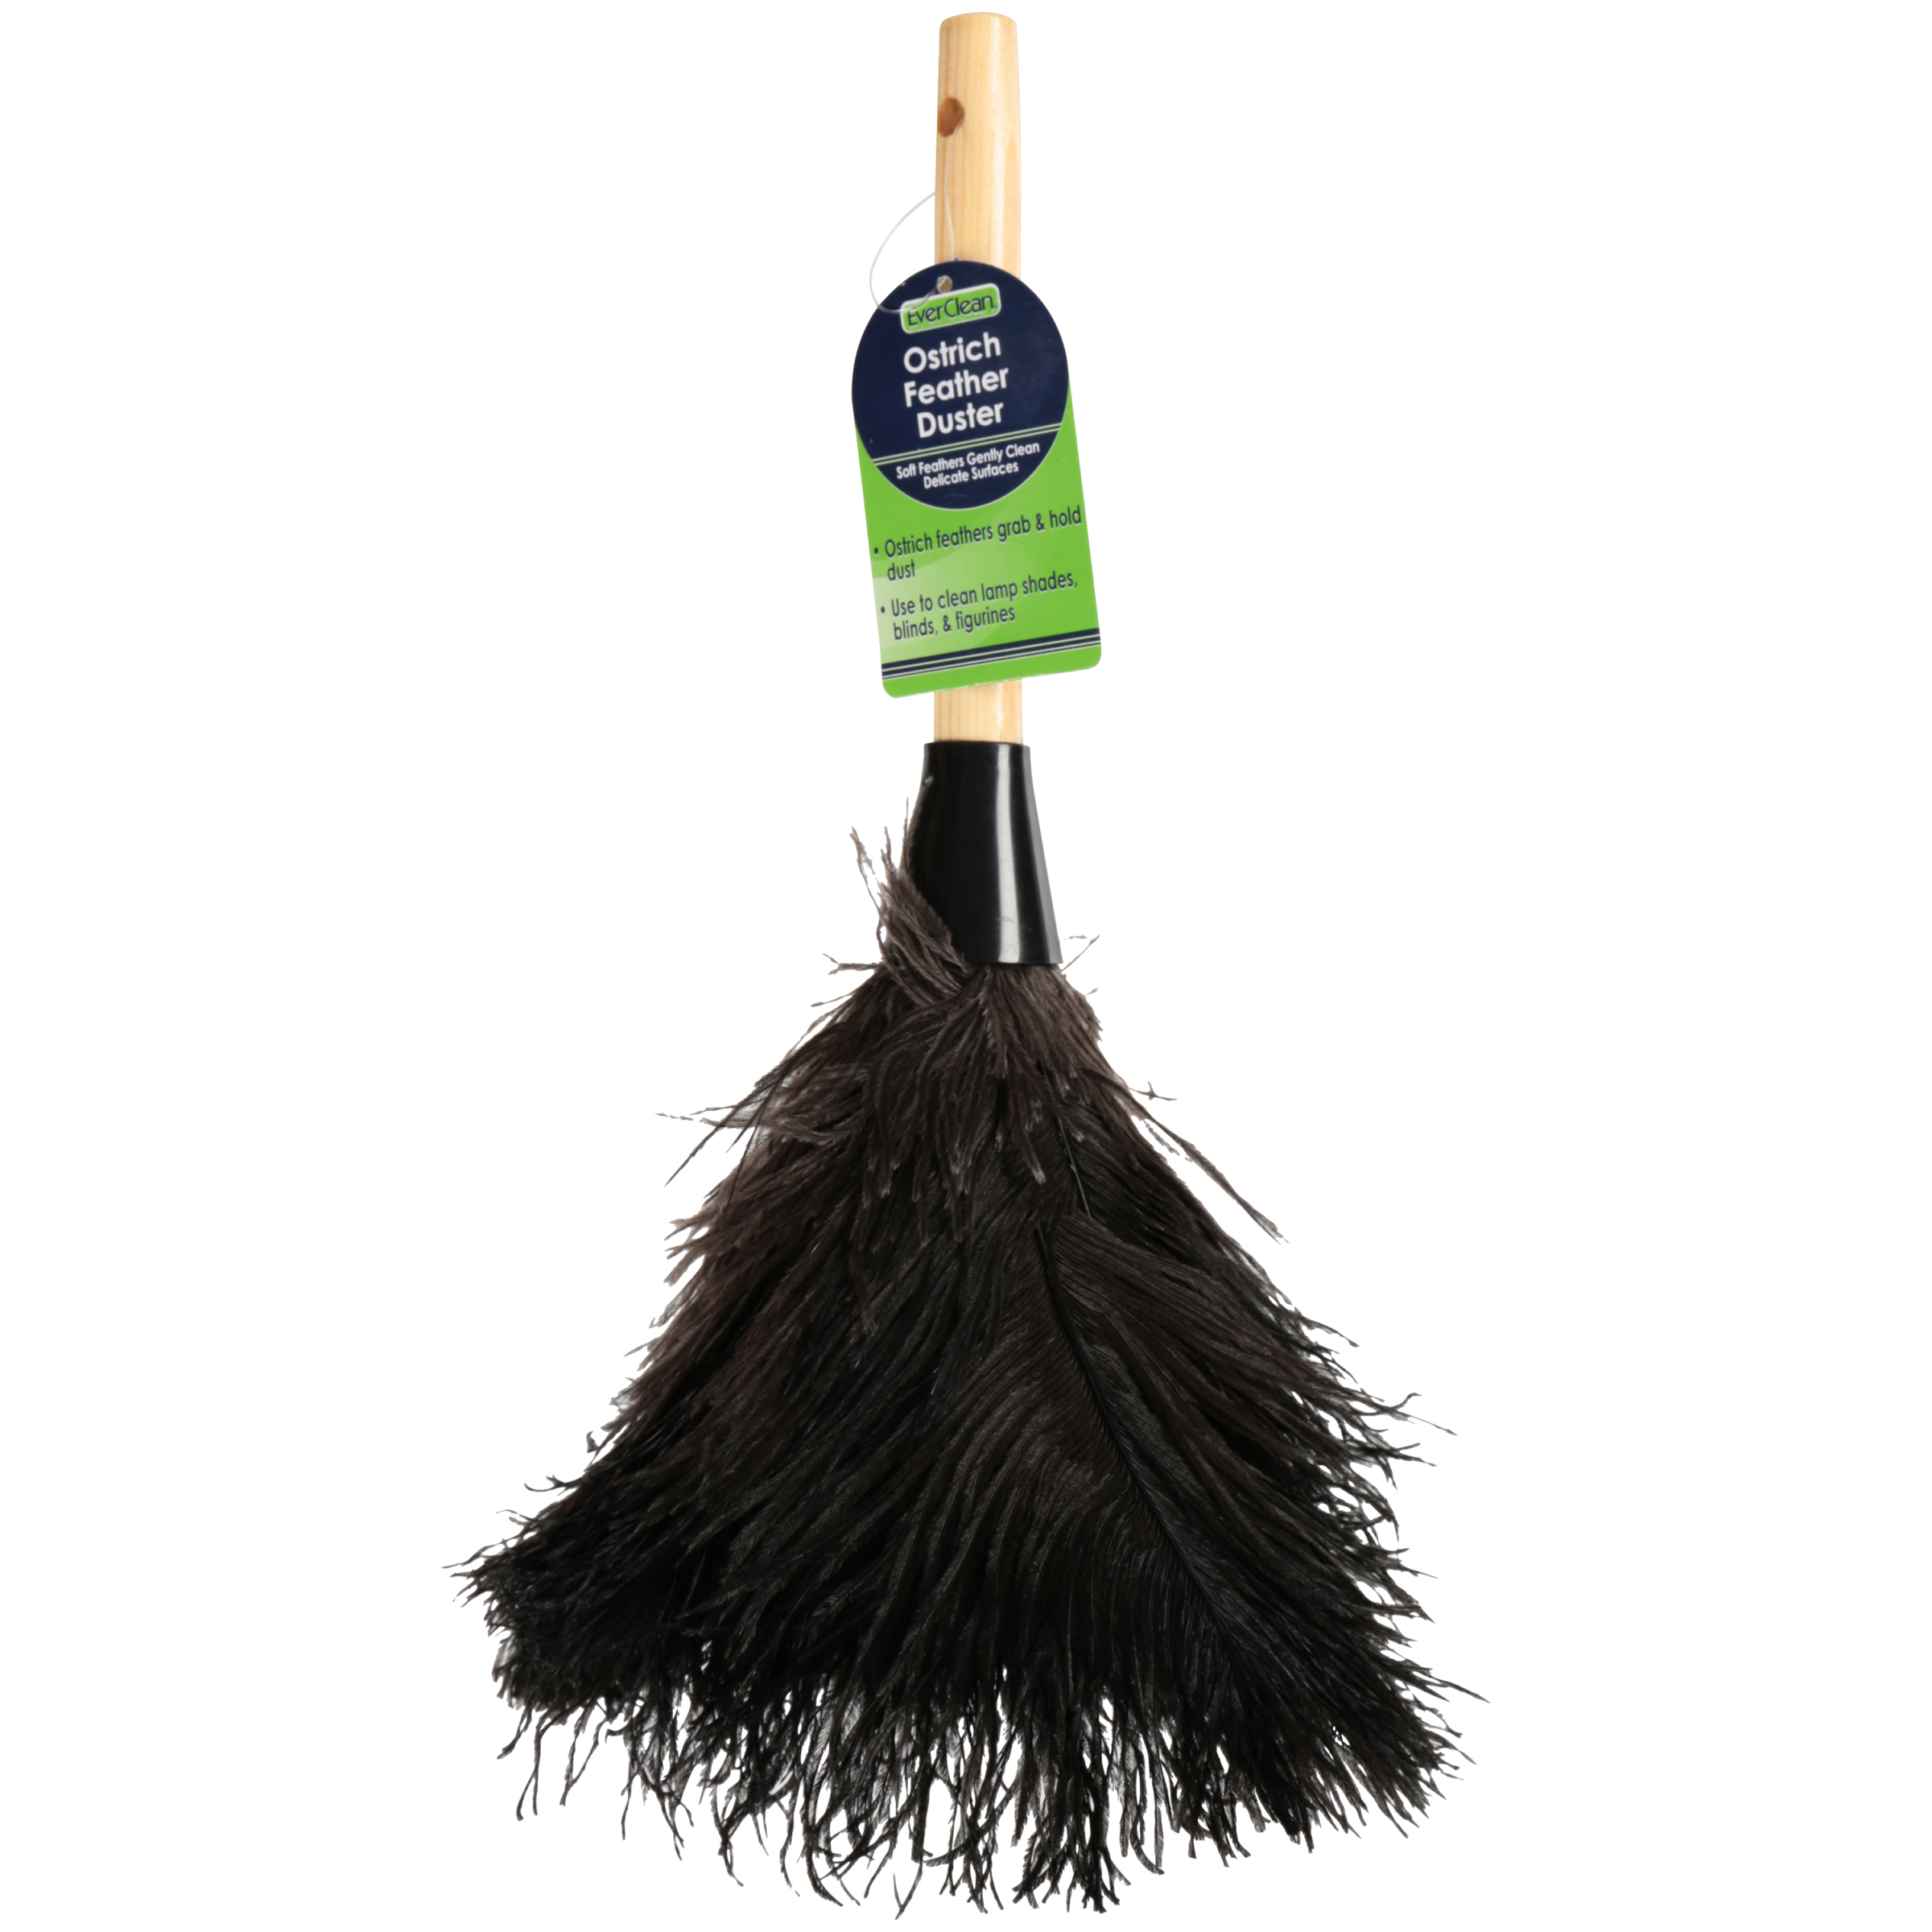 NOBRAND EverClean Ostrich Feather Duster - image 2 of 5